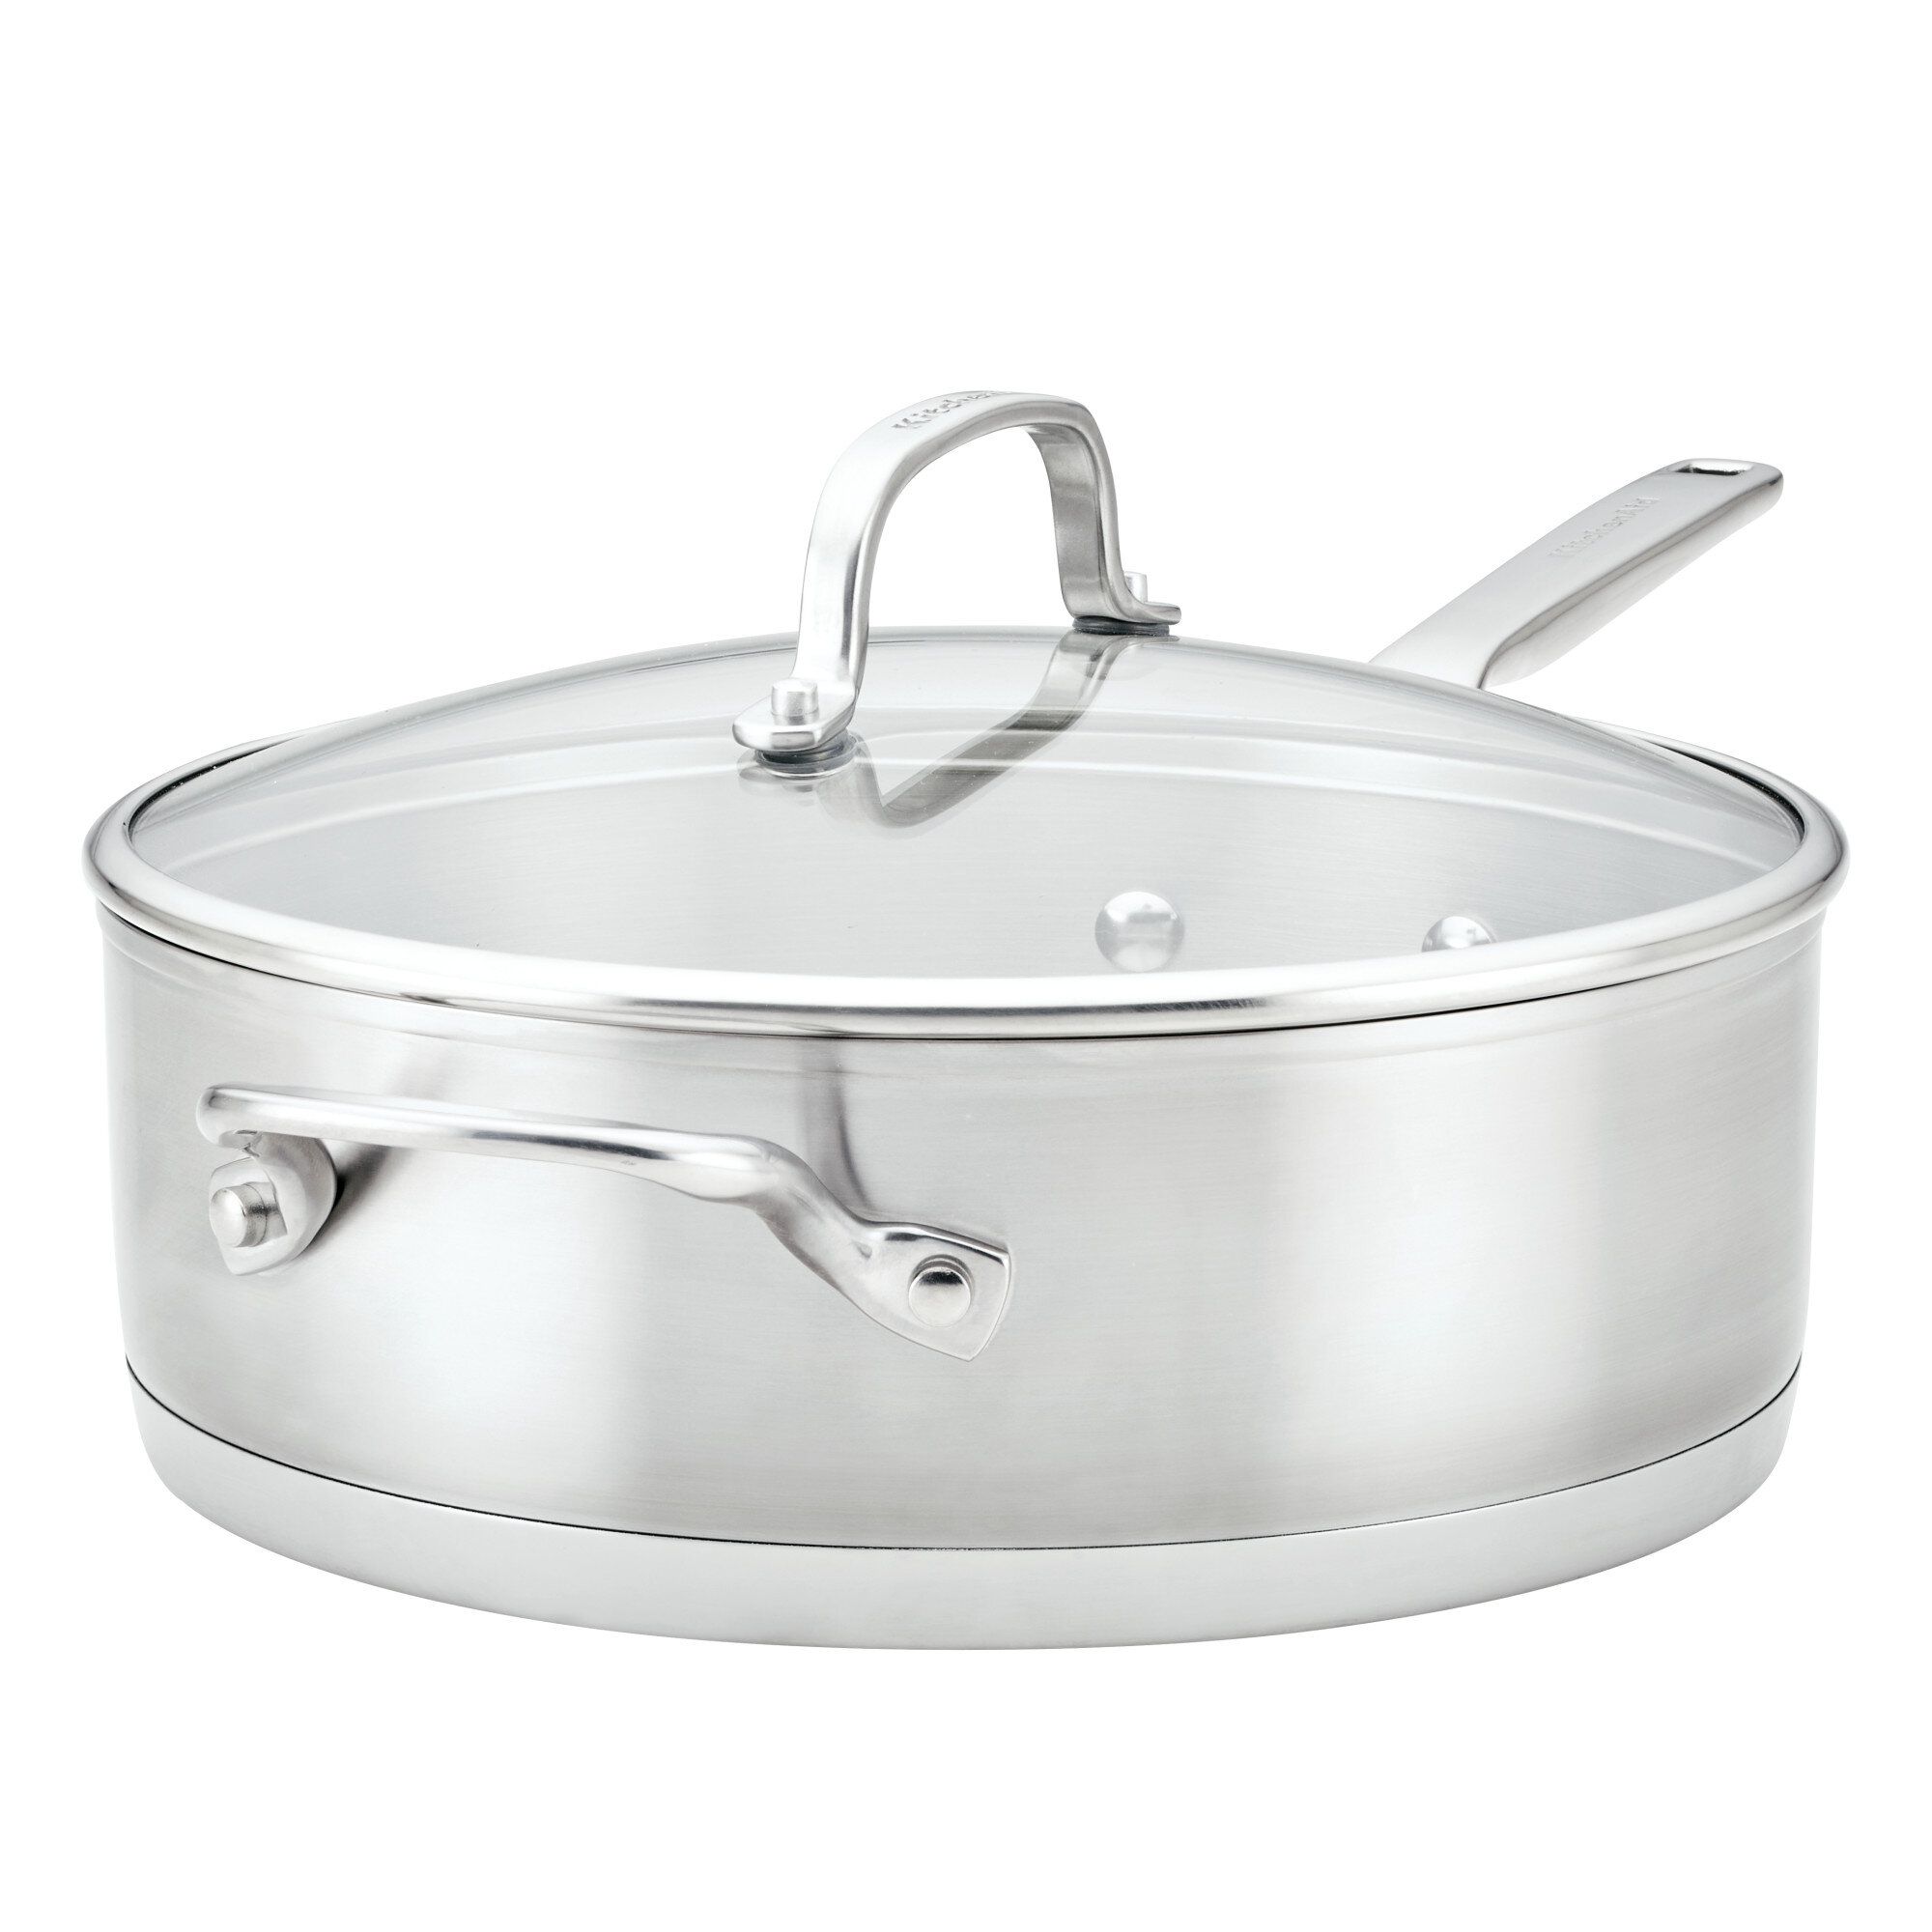  Cuisinart MultiClad Pro Stainless 6-Quart Saucepot with Cover &  MultiClad Pro Stainless Steel 1-1/2-Quart Saucepan with Cover : Home &  Kitchen